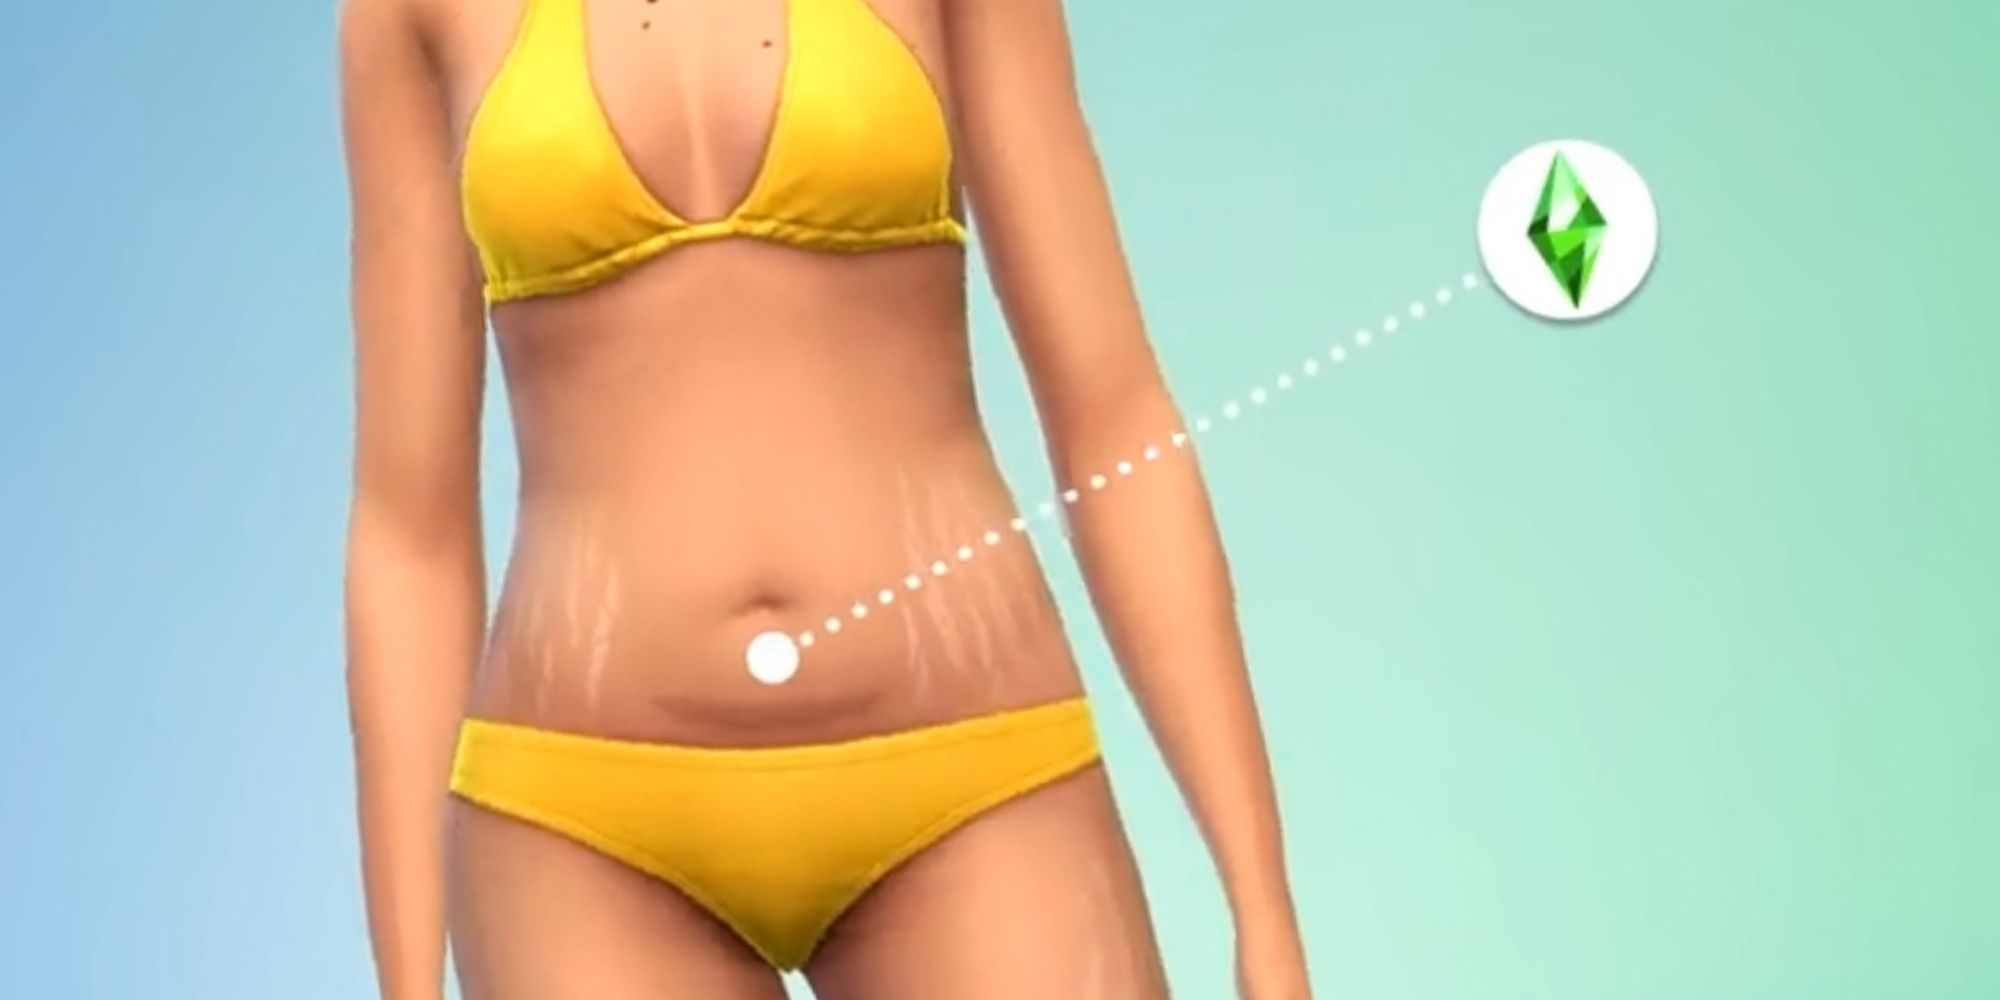 The Sims 4 close-up of a woman over a blue background with a line pointing to her caesarean scars